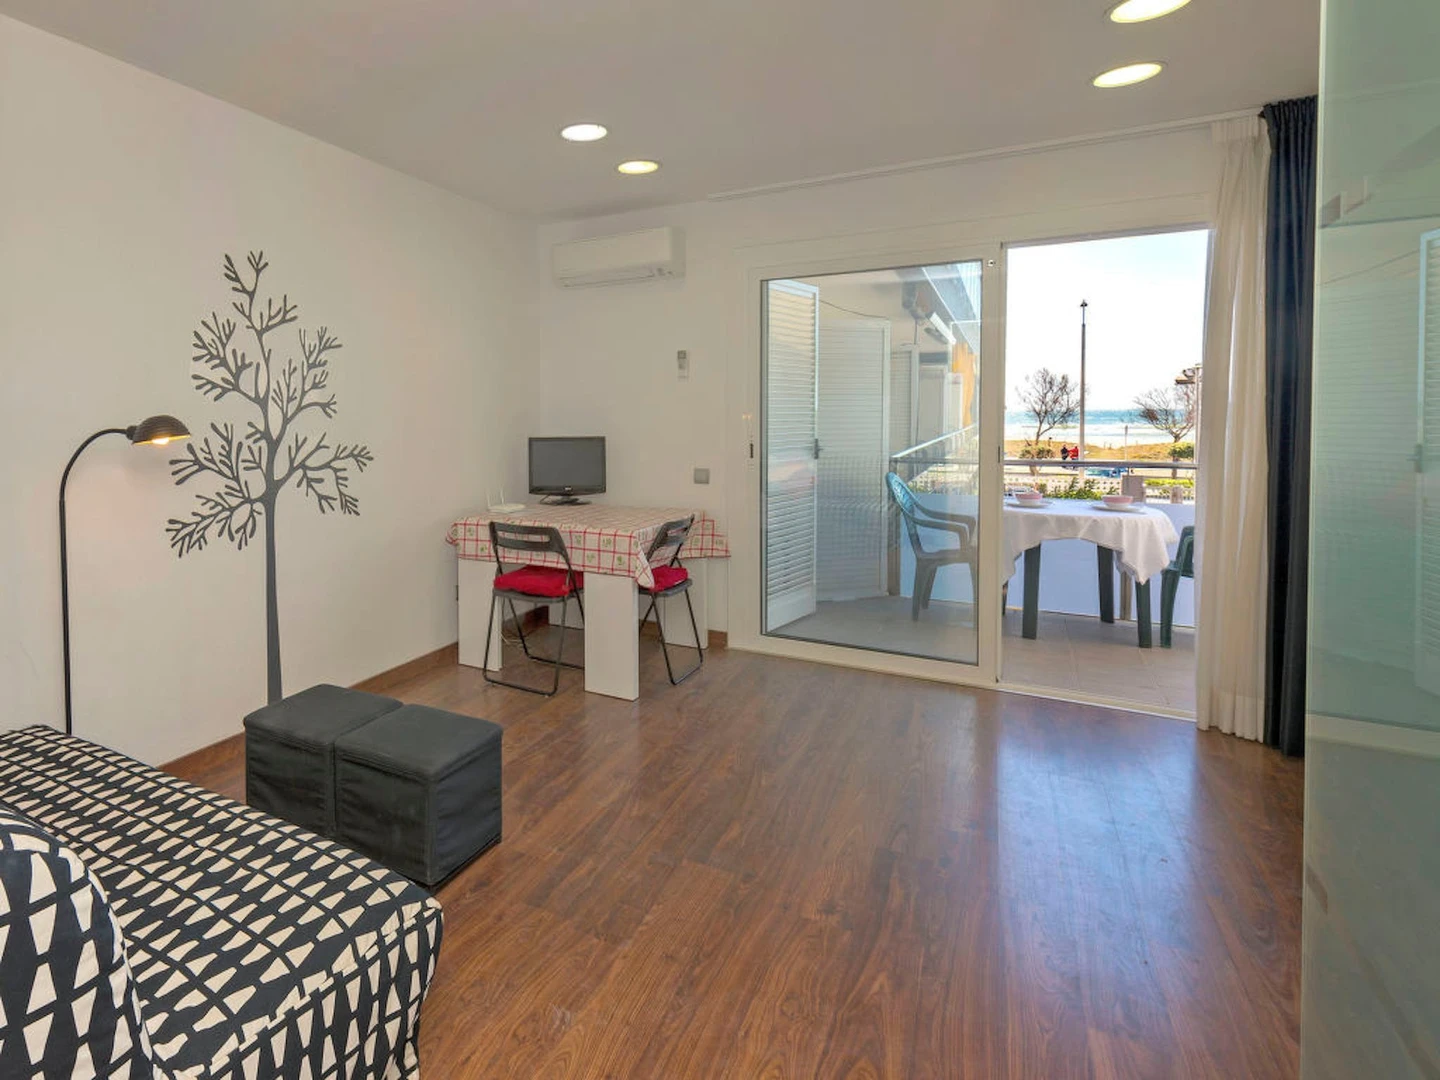 Modern and bright flat in Castelldefels